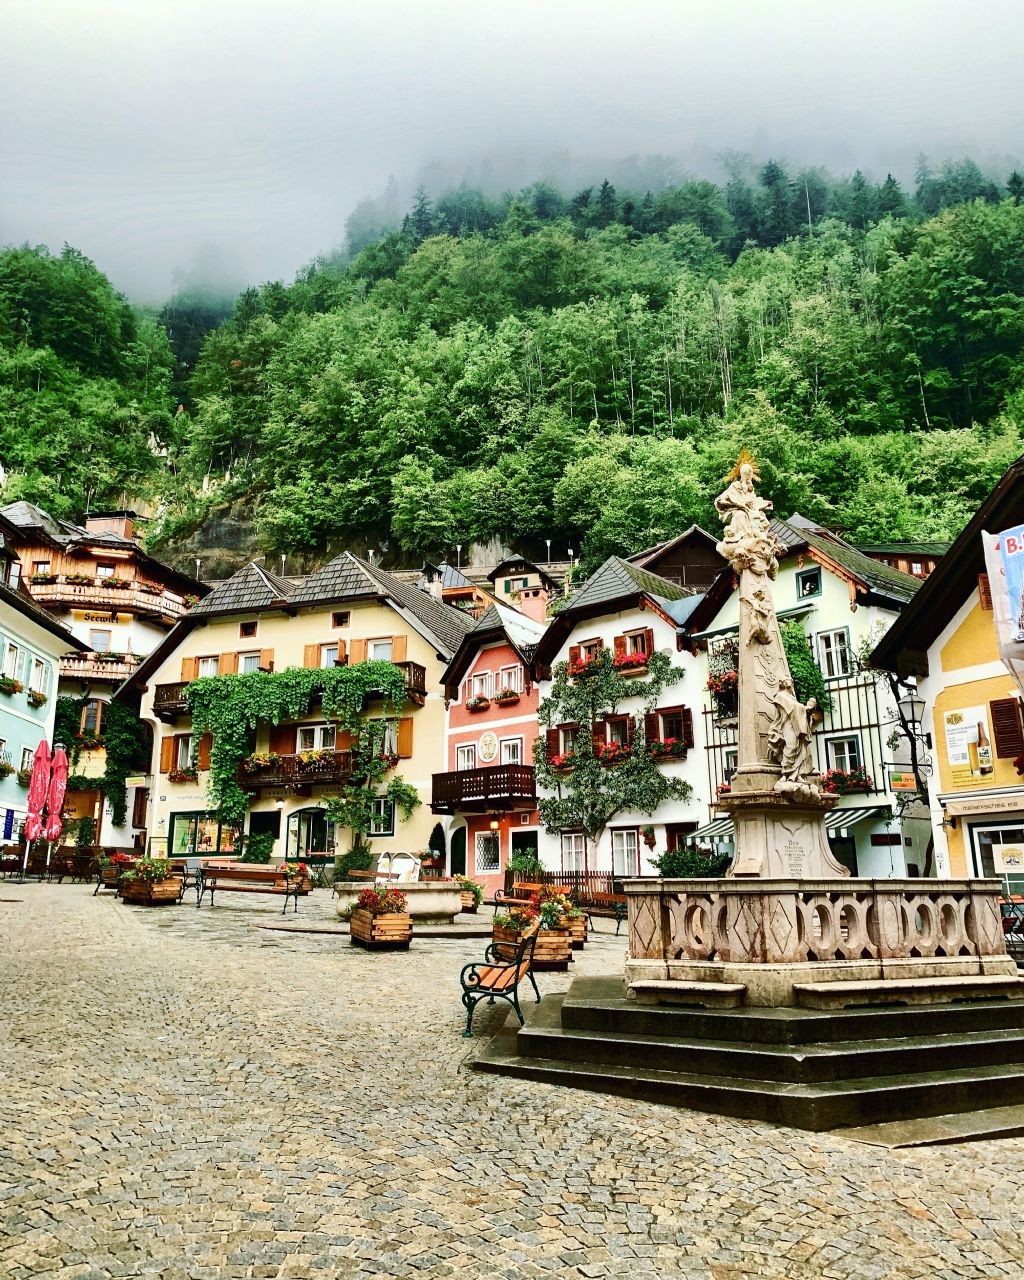 Hallstatt is located in central Austria, and the closest international airport is Salzburg Airport. From there, you can take a train or bus to Hallstatt.